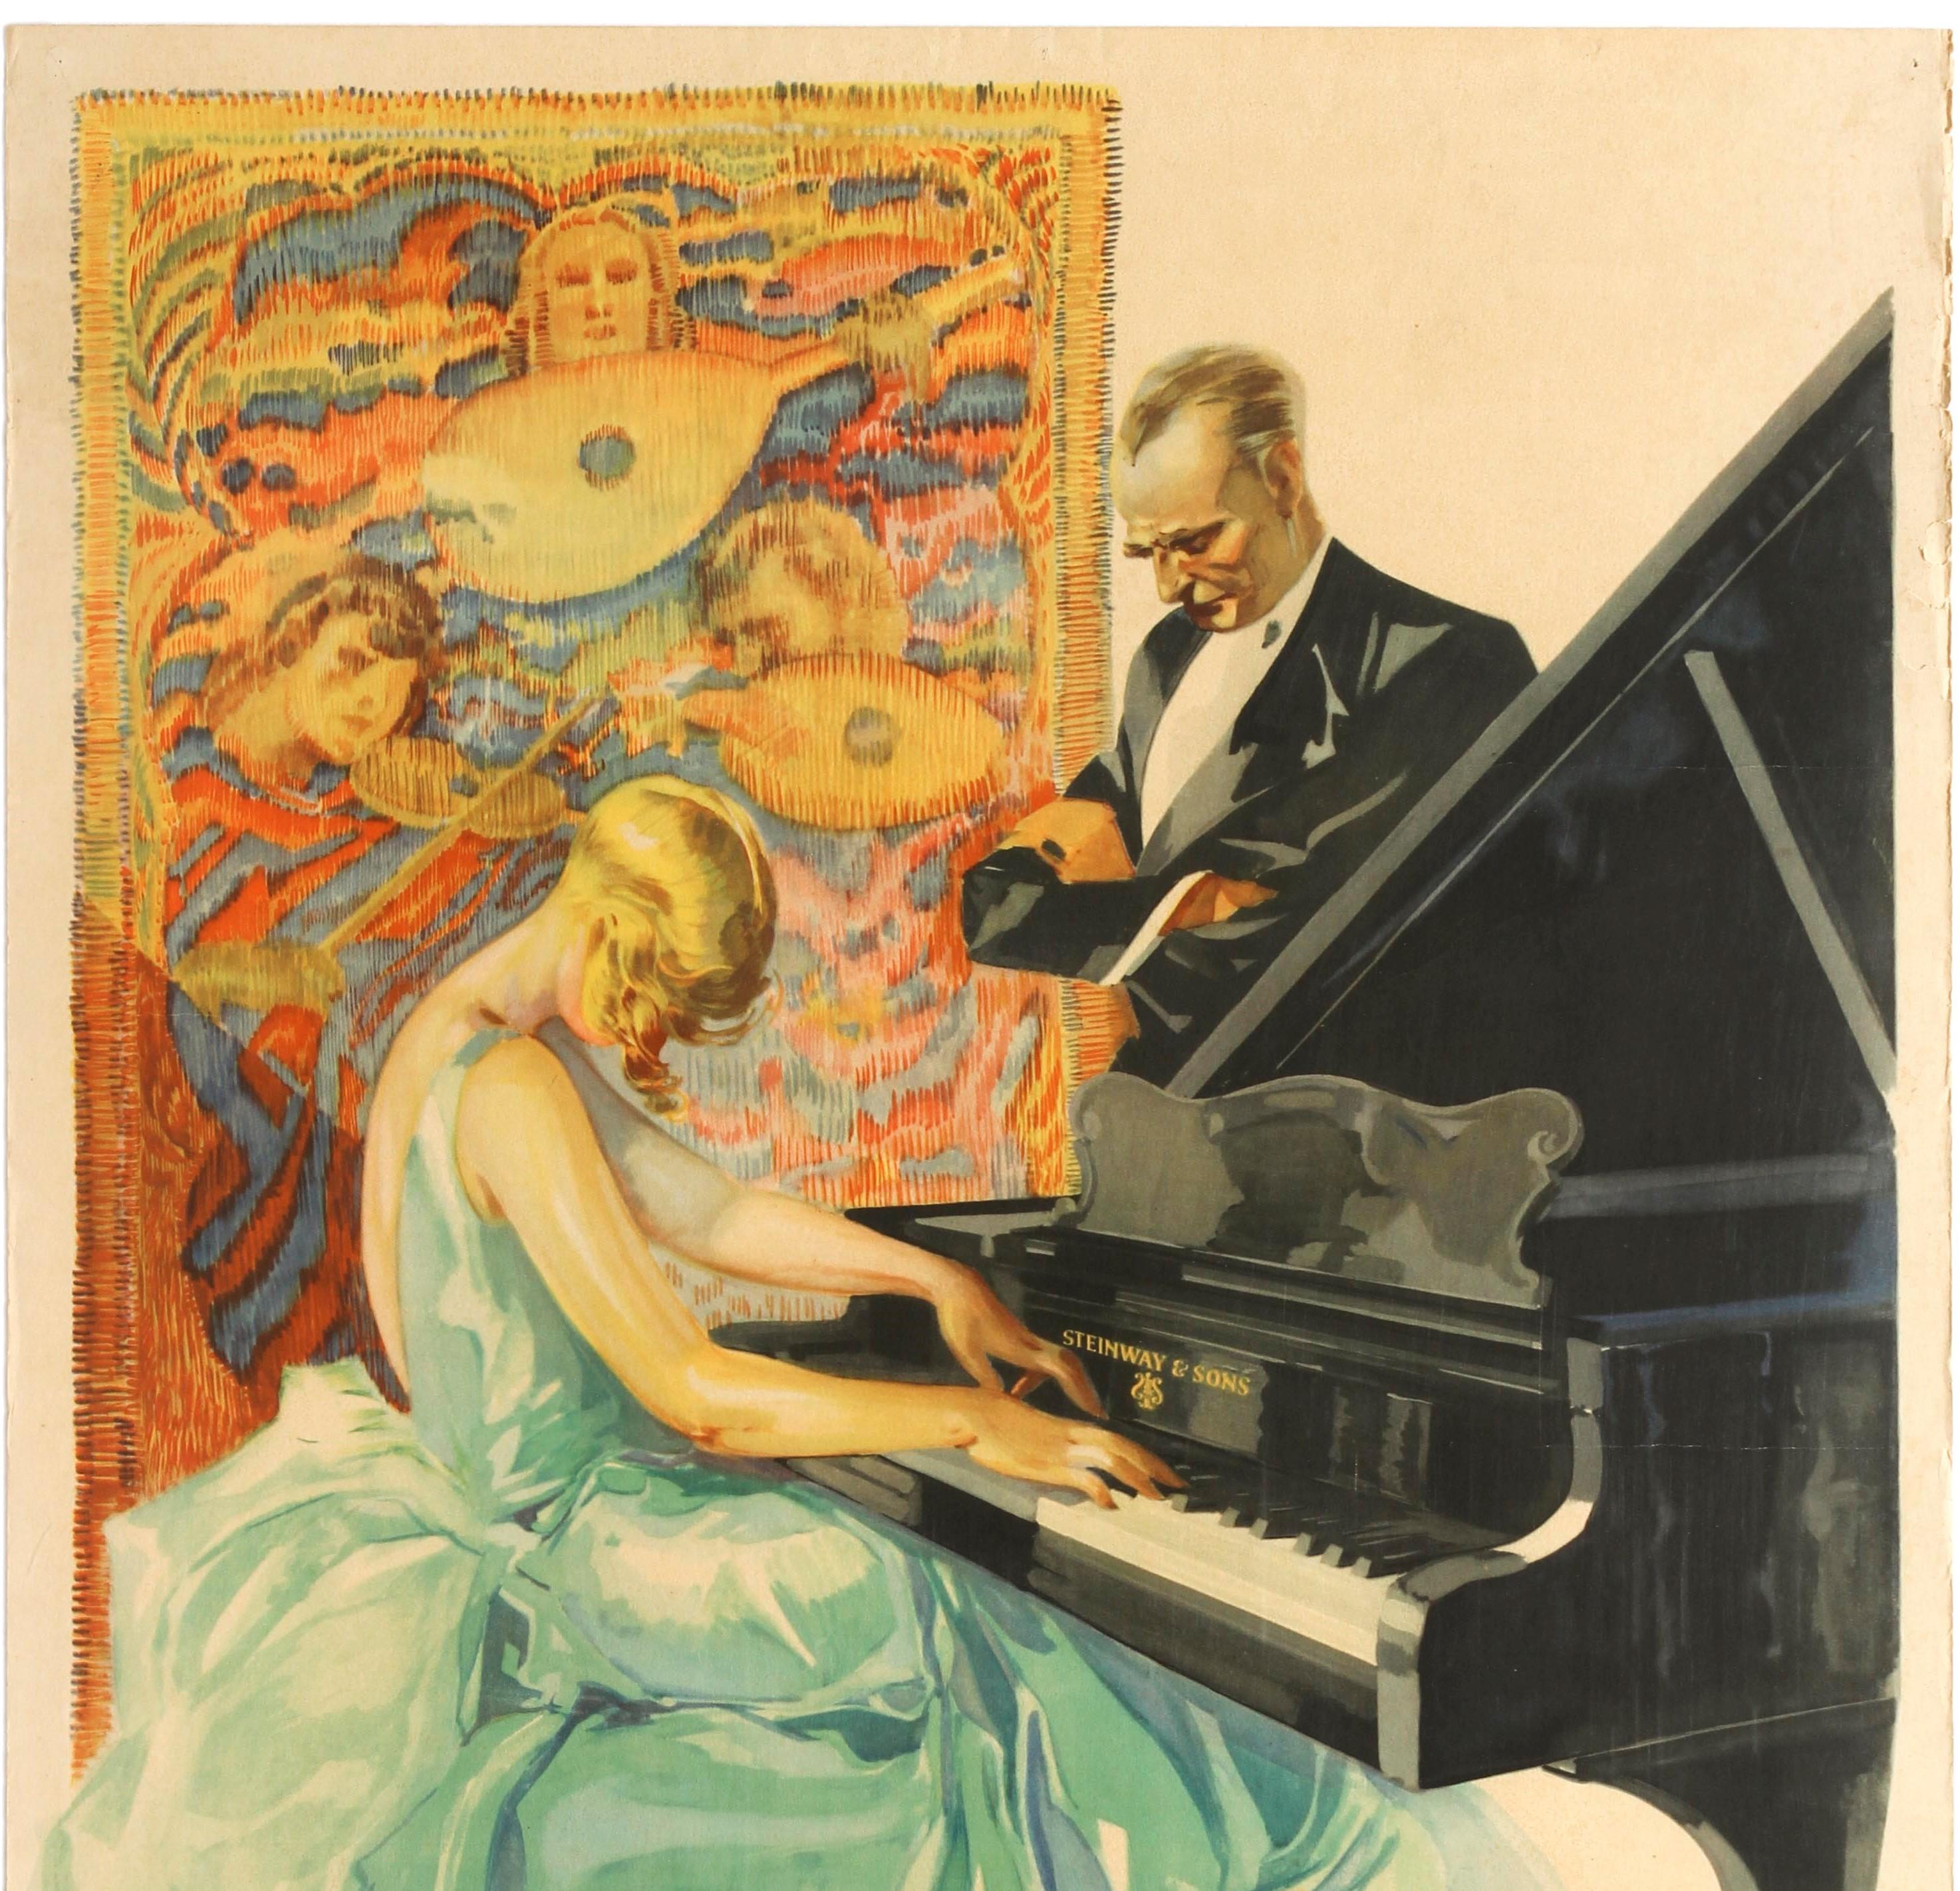 Original vintage advertising poster for Steinway pianos featuring a great illustration by the German artist Werner Von Axster-Heudtlass (1898-1949) depicting a young lady wearing a fabulous dress flowing around the piano stool, playing the piano